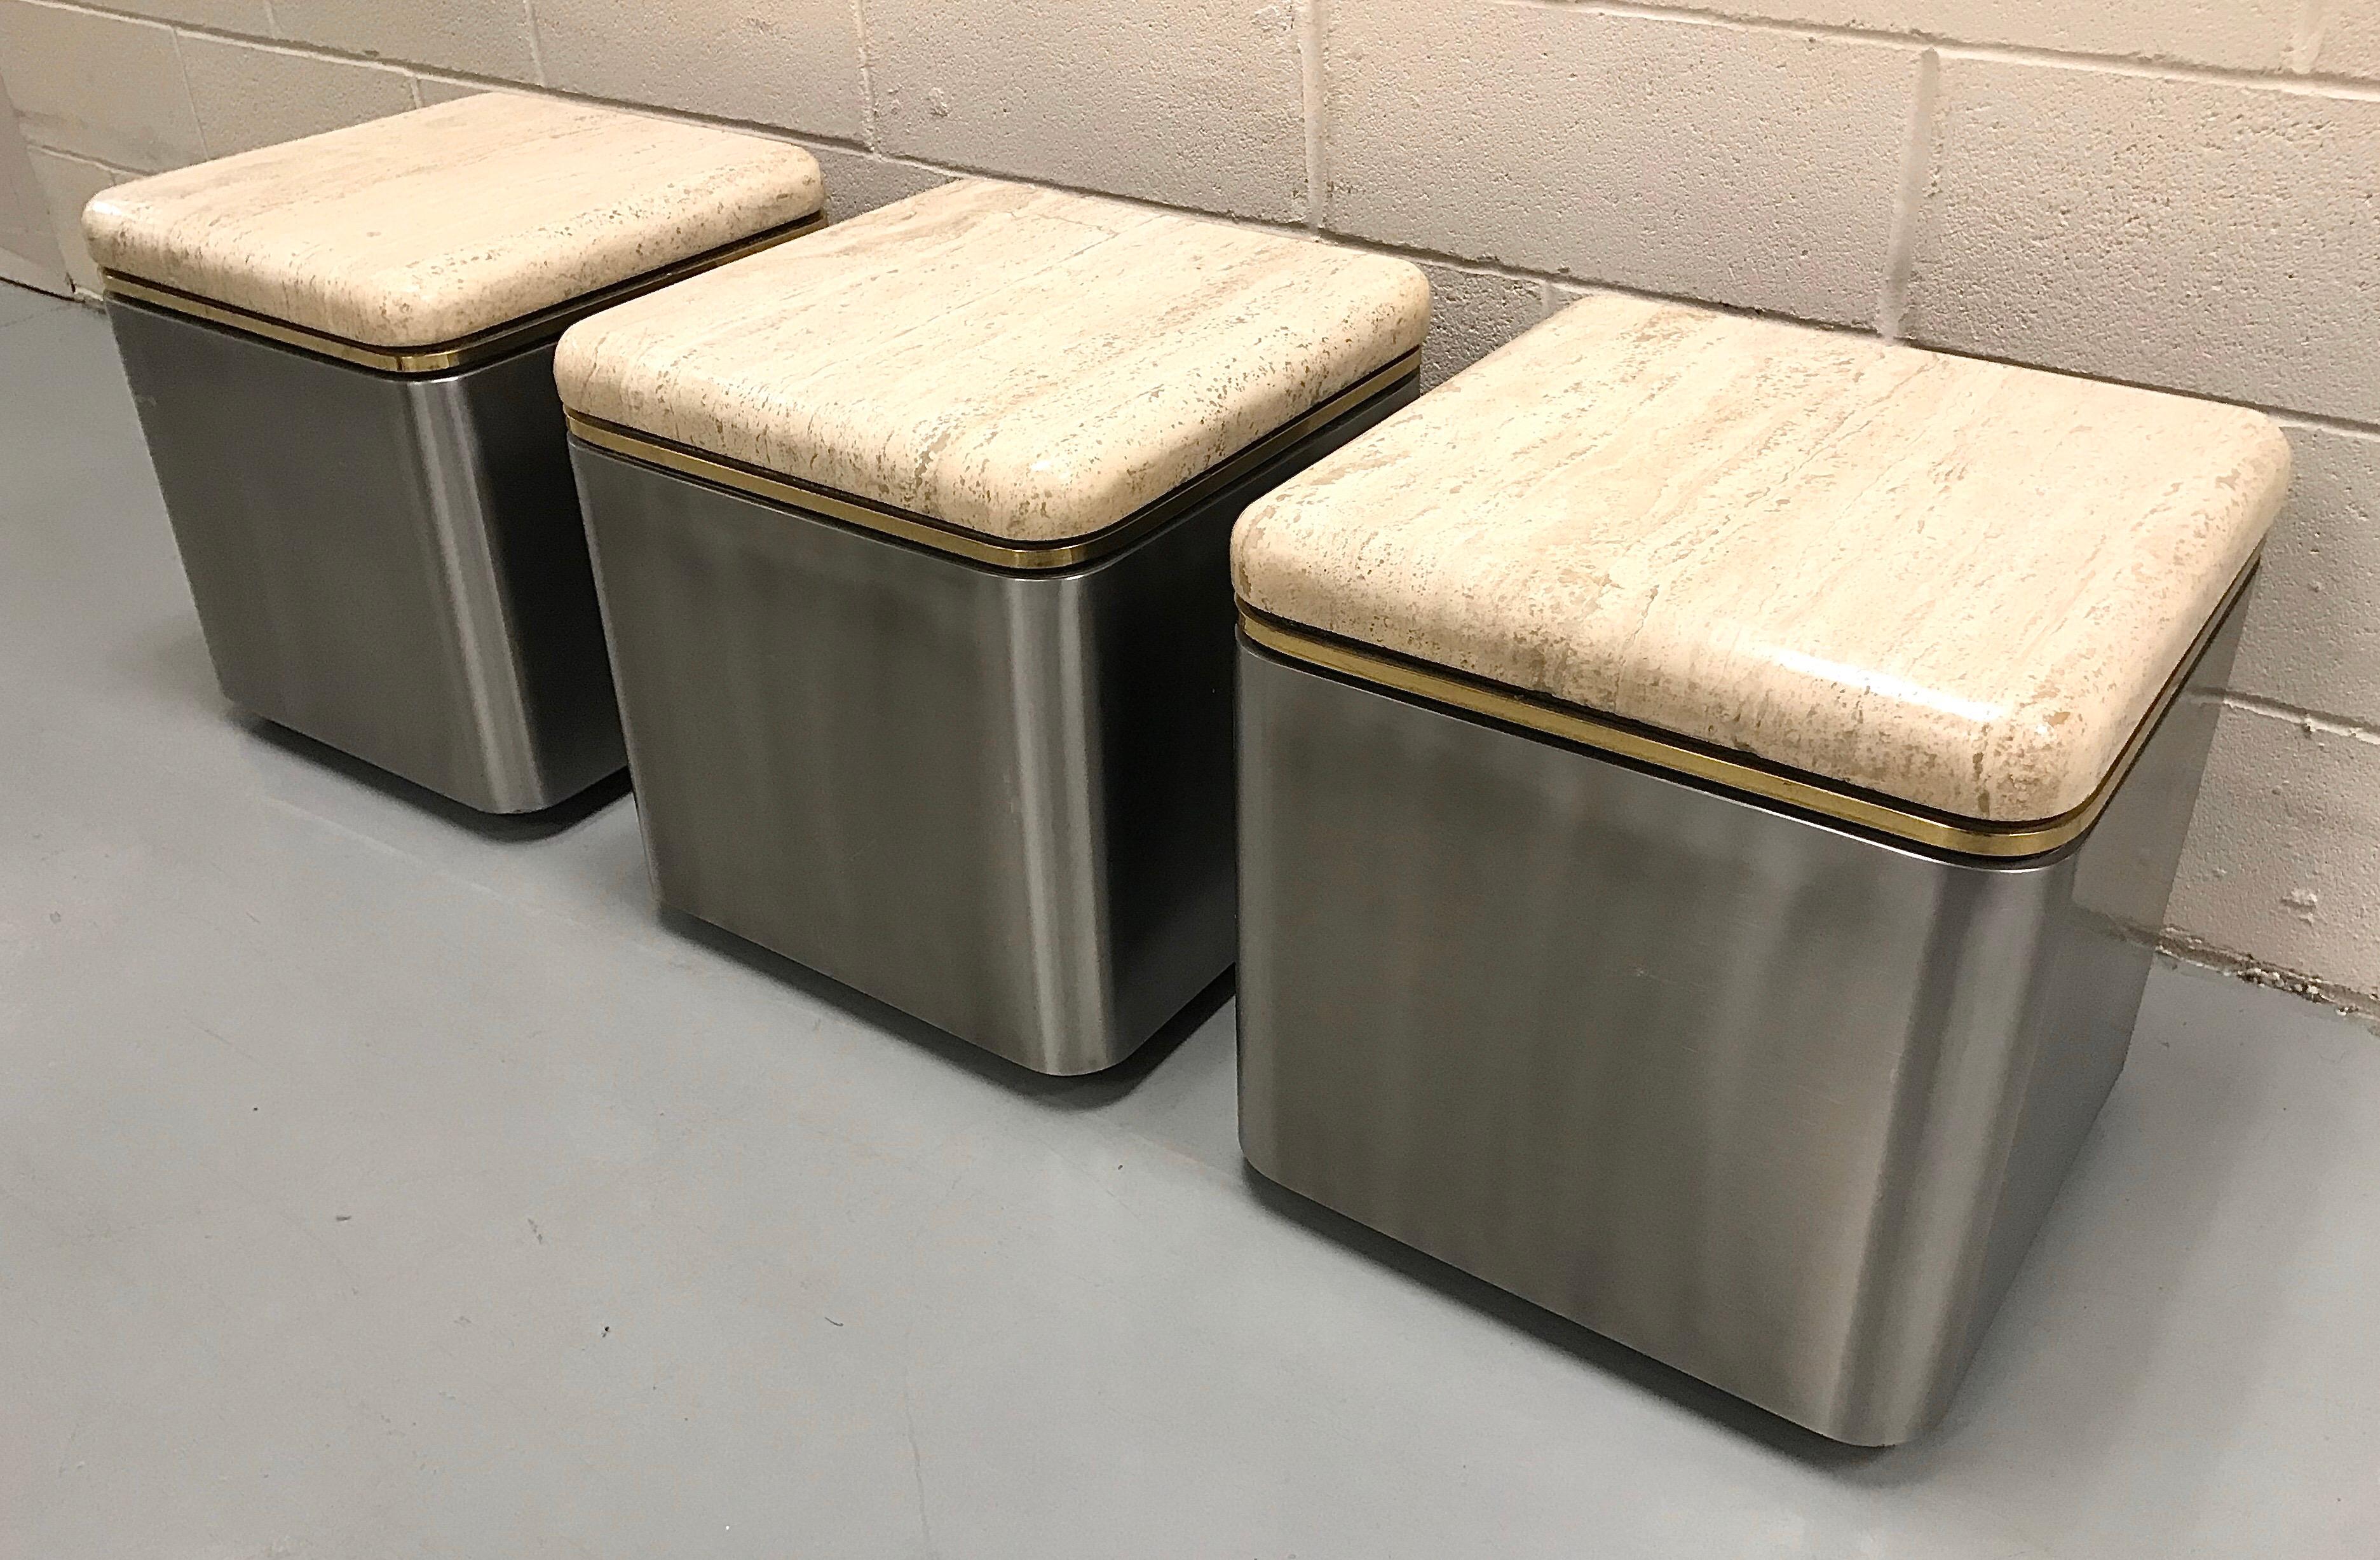 Very well built group of three stainless steel, brass and travertine tables on casters, USA, 1980s.